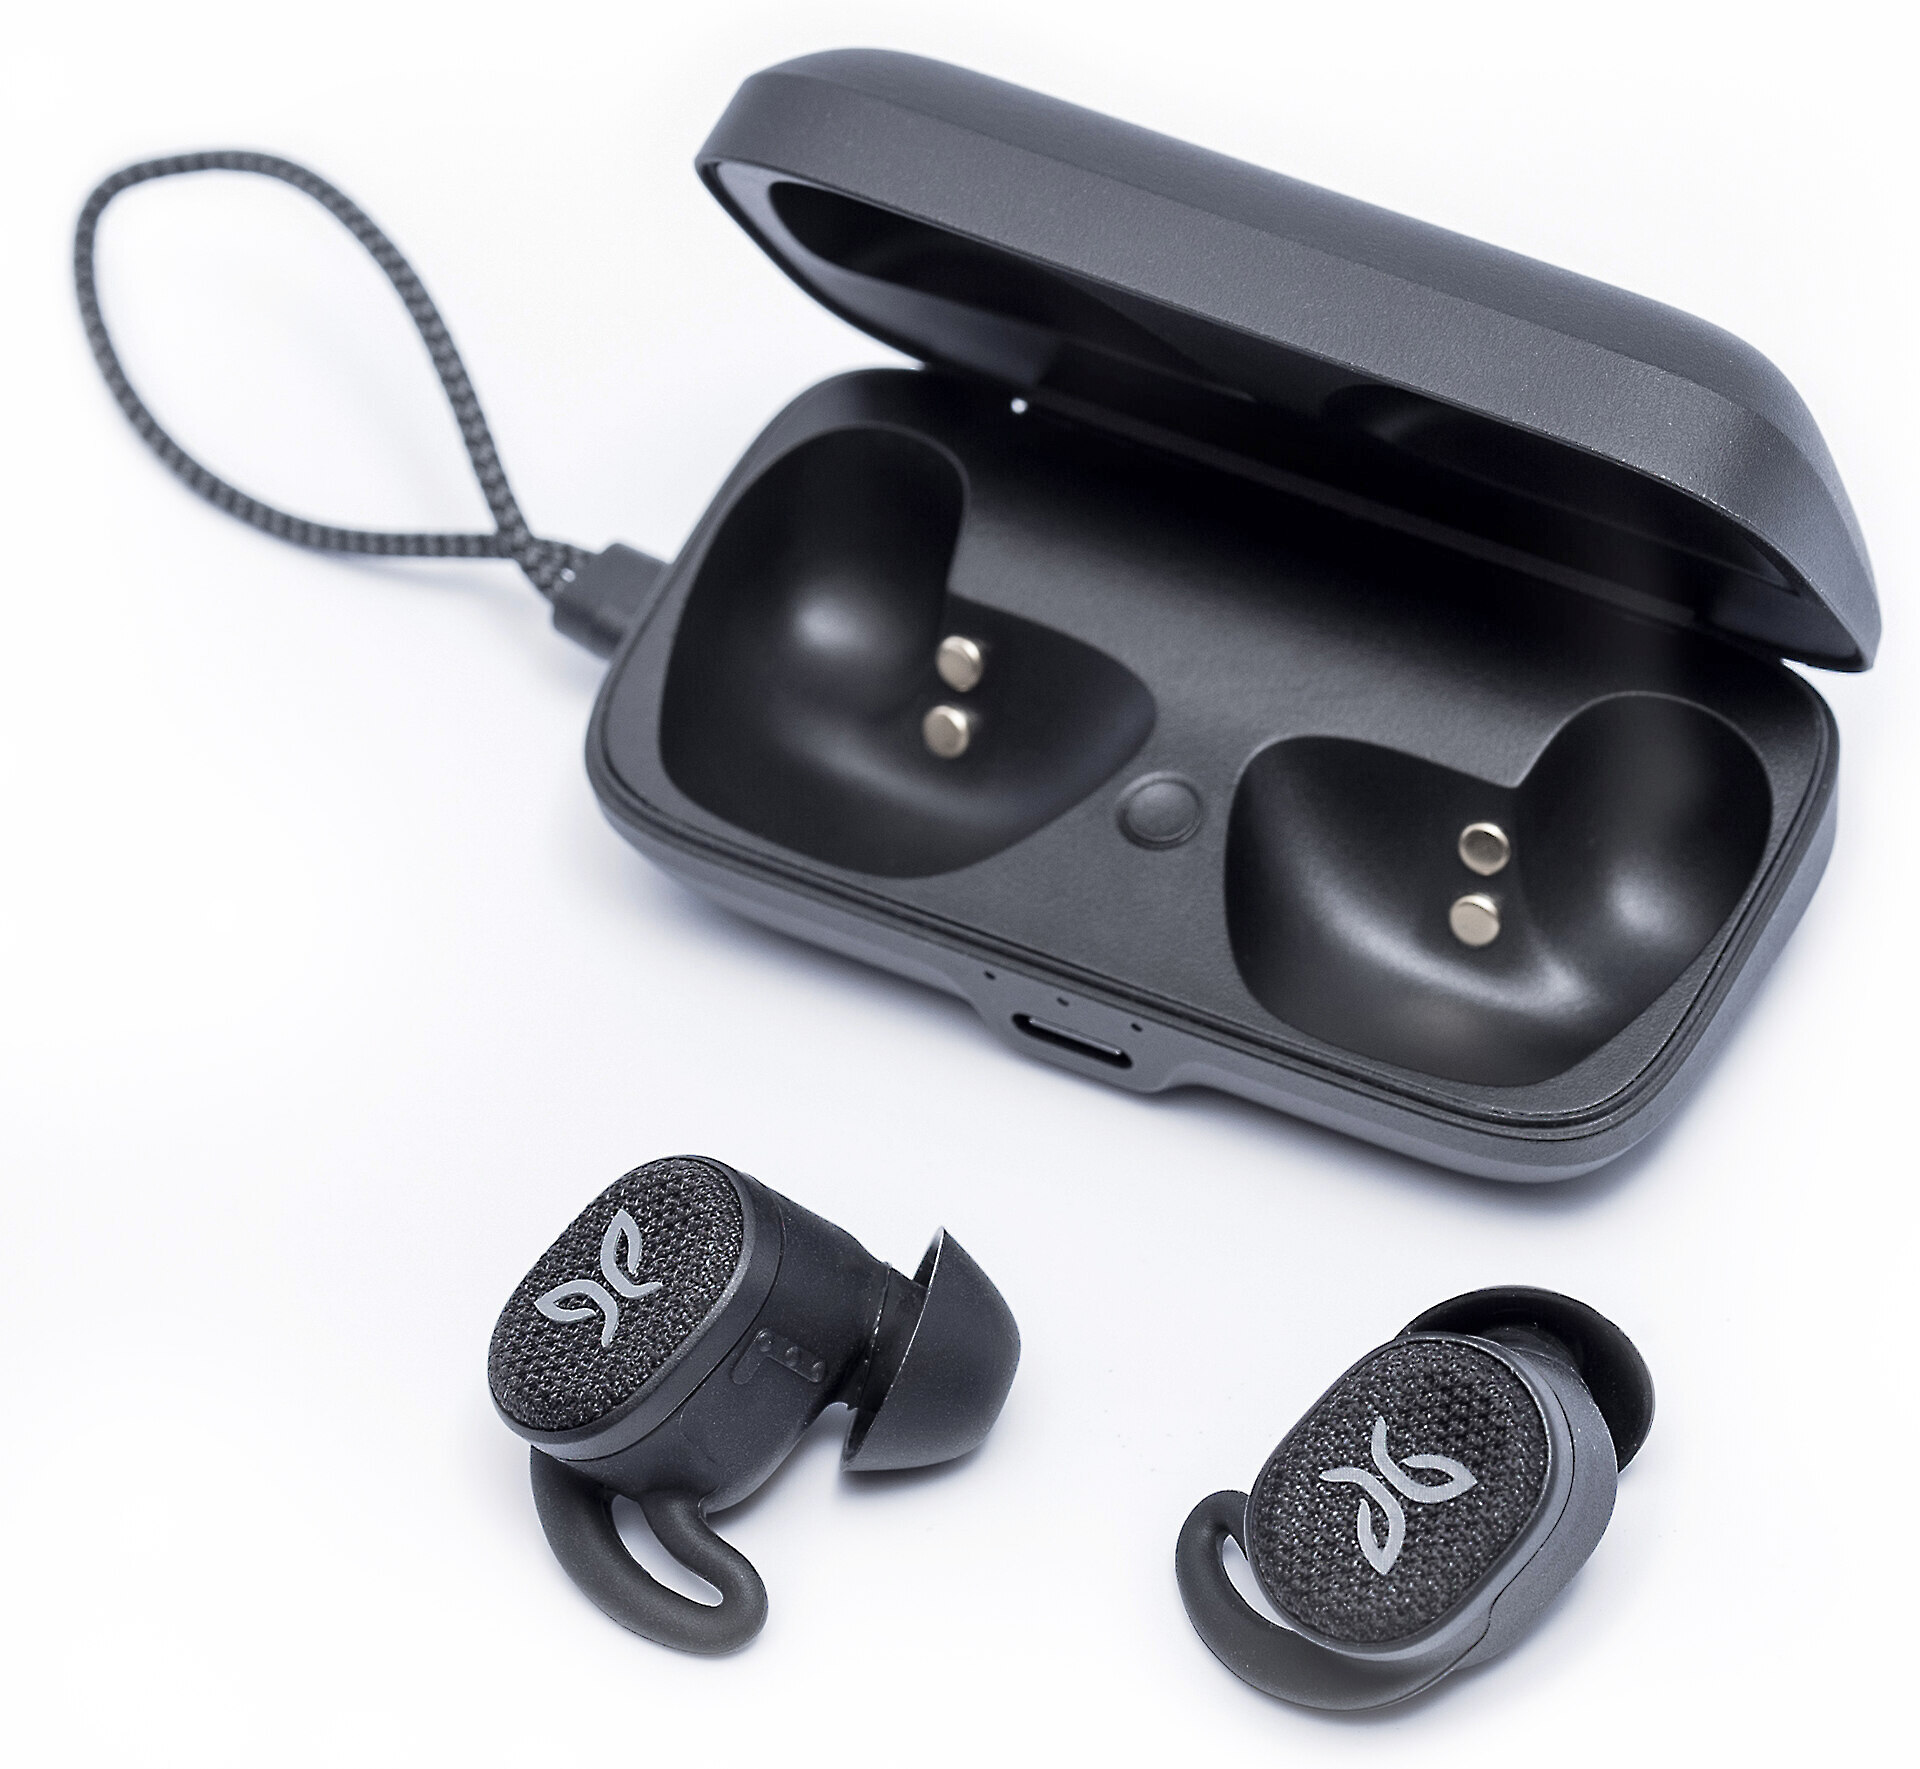 Customer Reviews: Jaybird Vista 2 (Black) True wireless sports earbuds with  active noise cancellation at Crutchfield